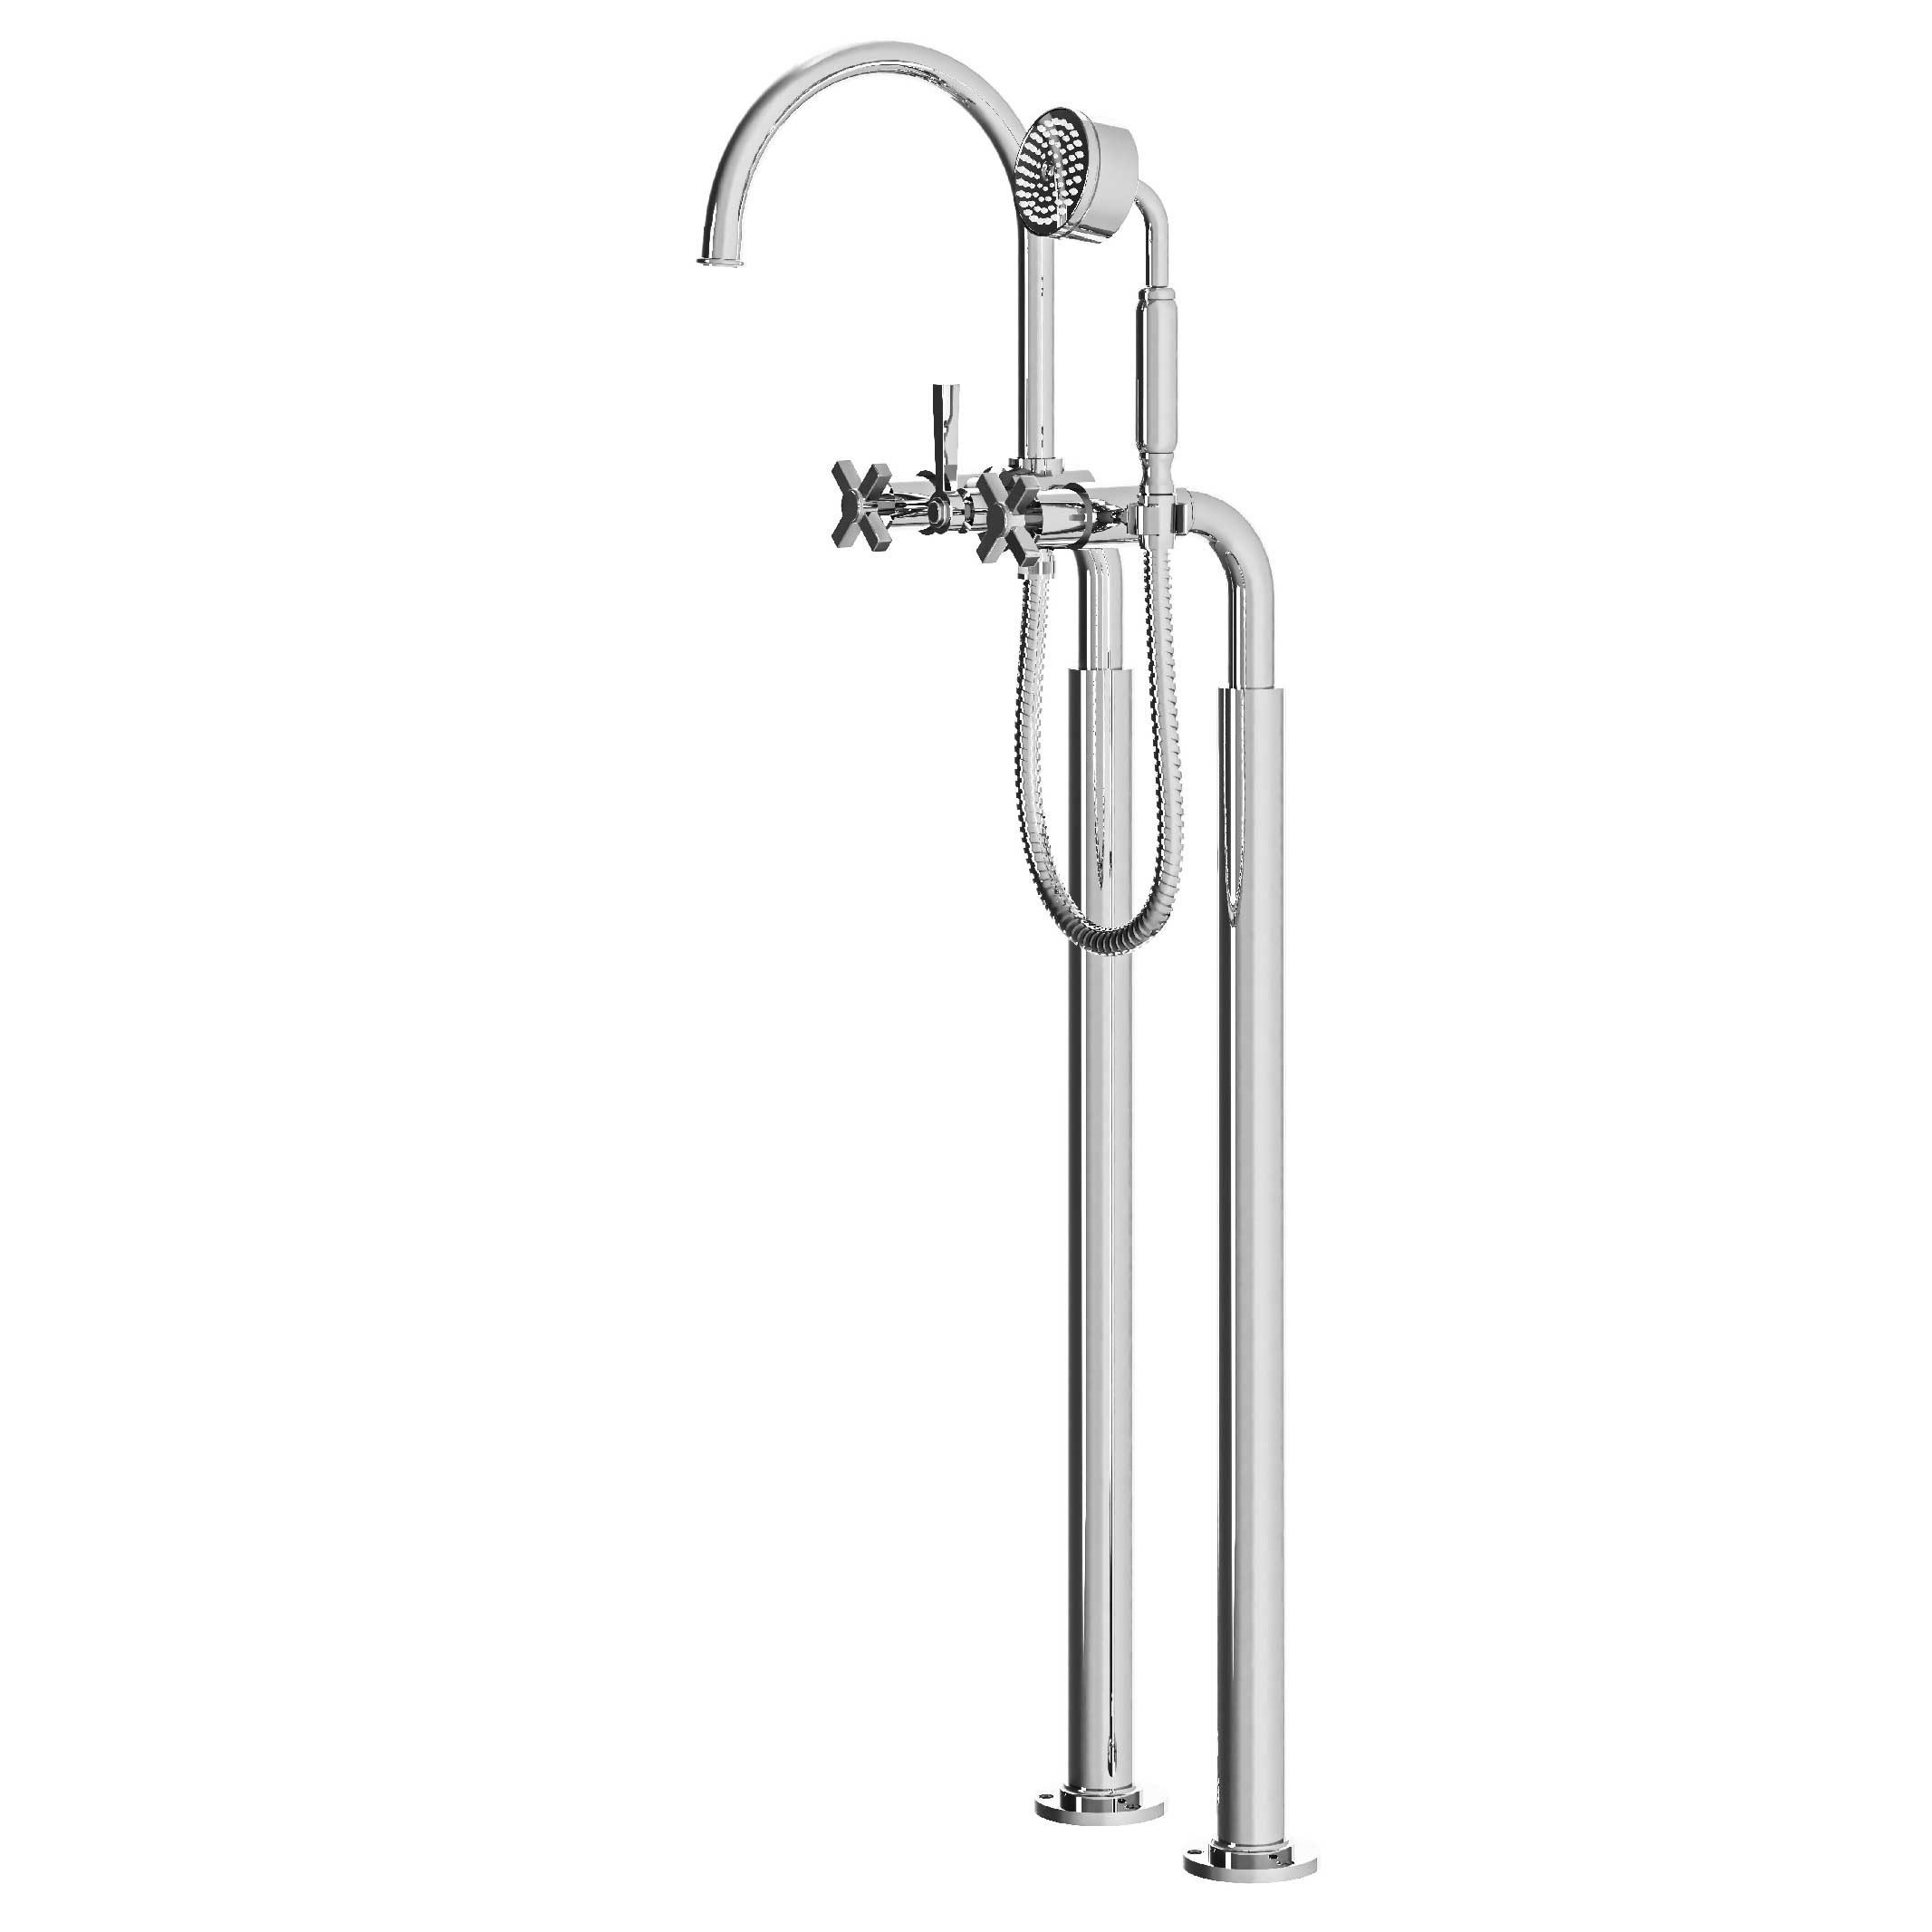 M60-3309 Floor mounted bath and shower mixer